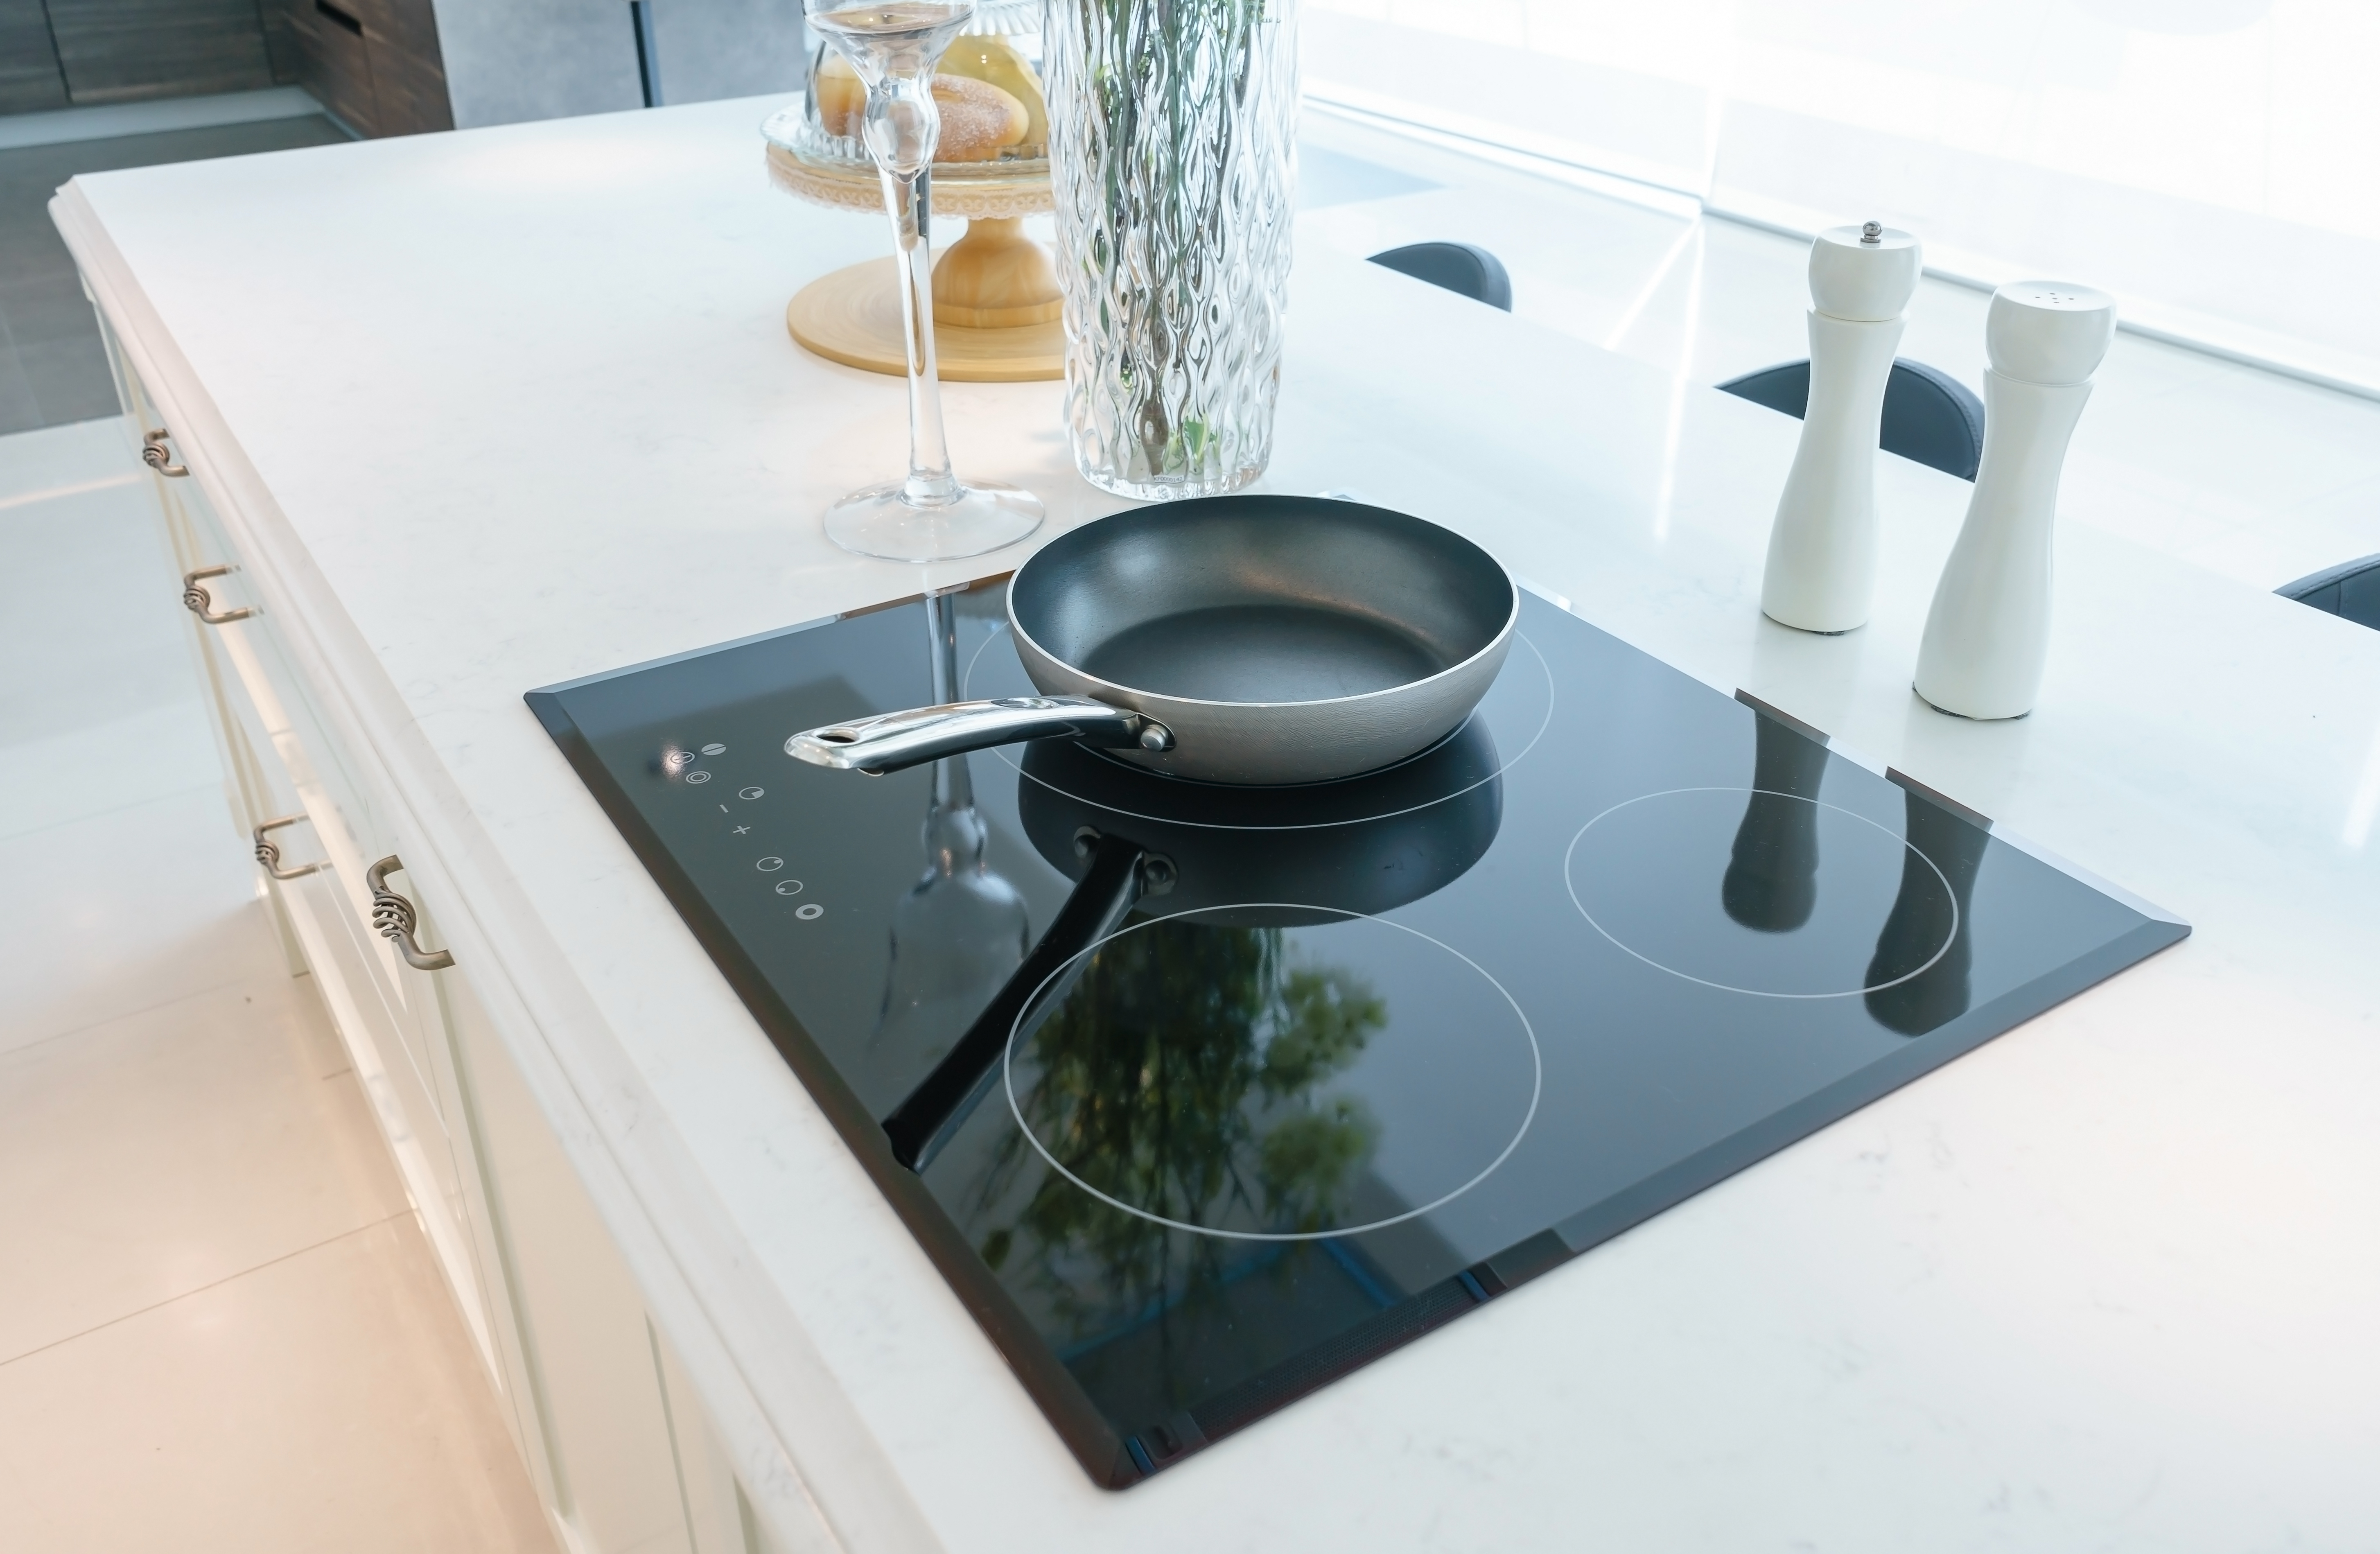 Which Pans Are Suitable for Ceramic-Glass Cooktops?